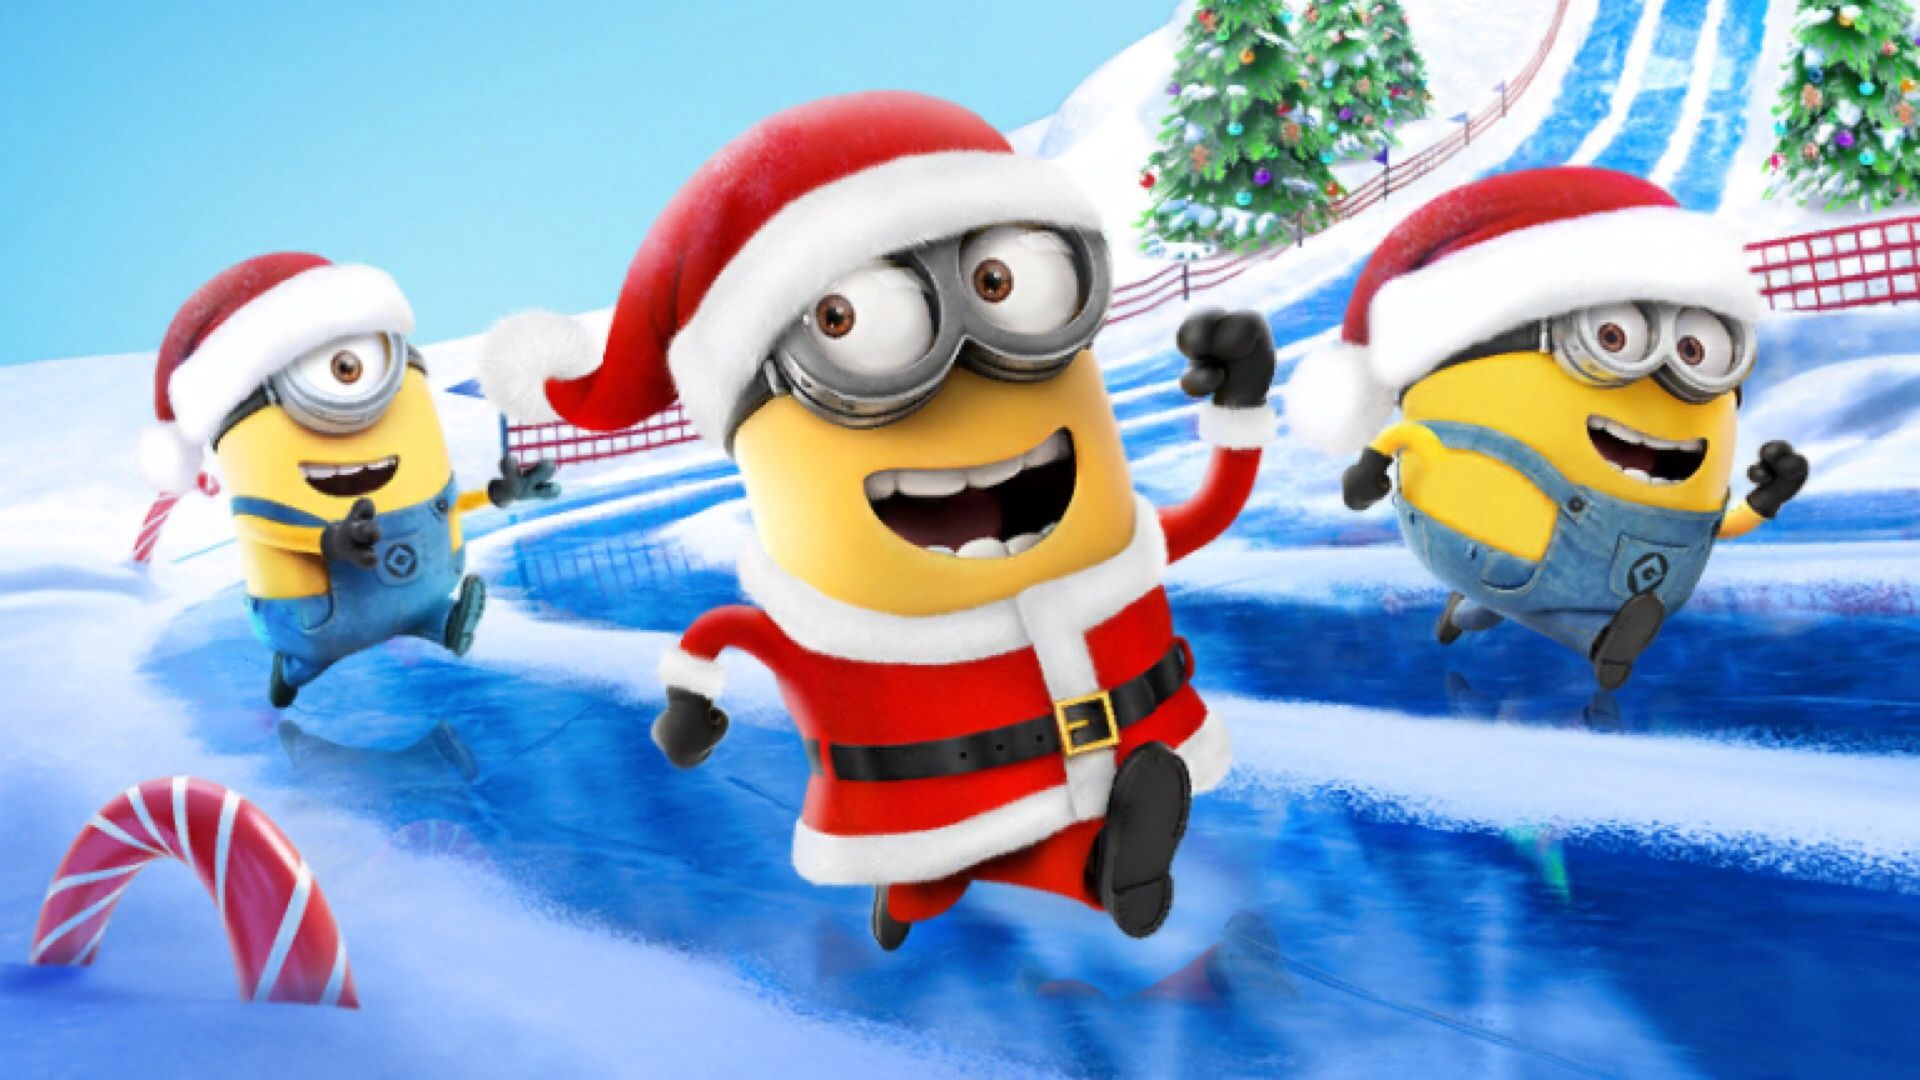 Mobile Game Despicable Me: Minion Rush Gets Festive Update